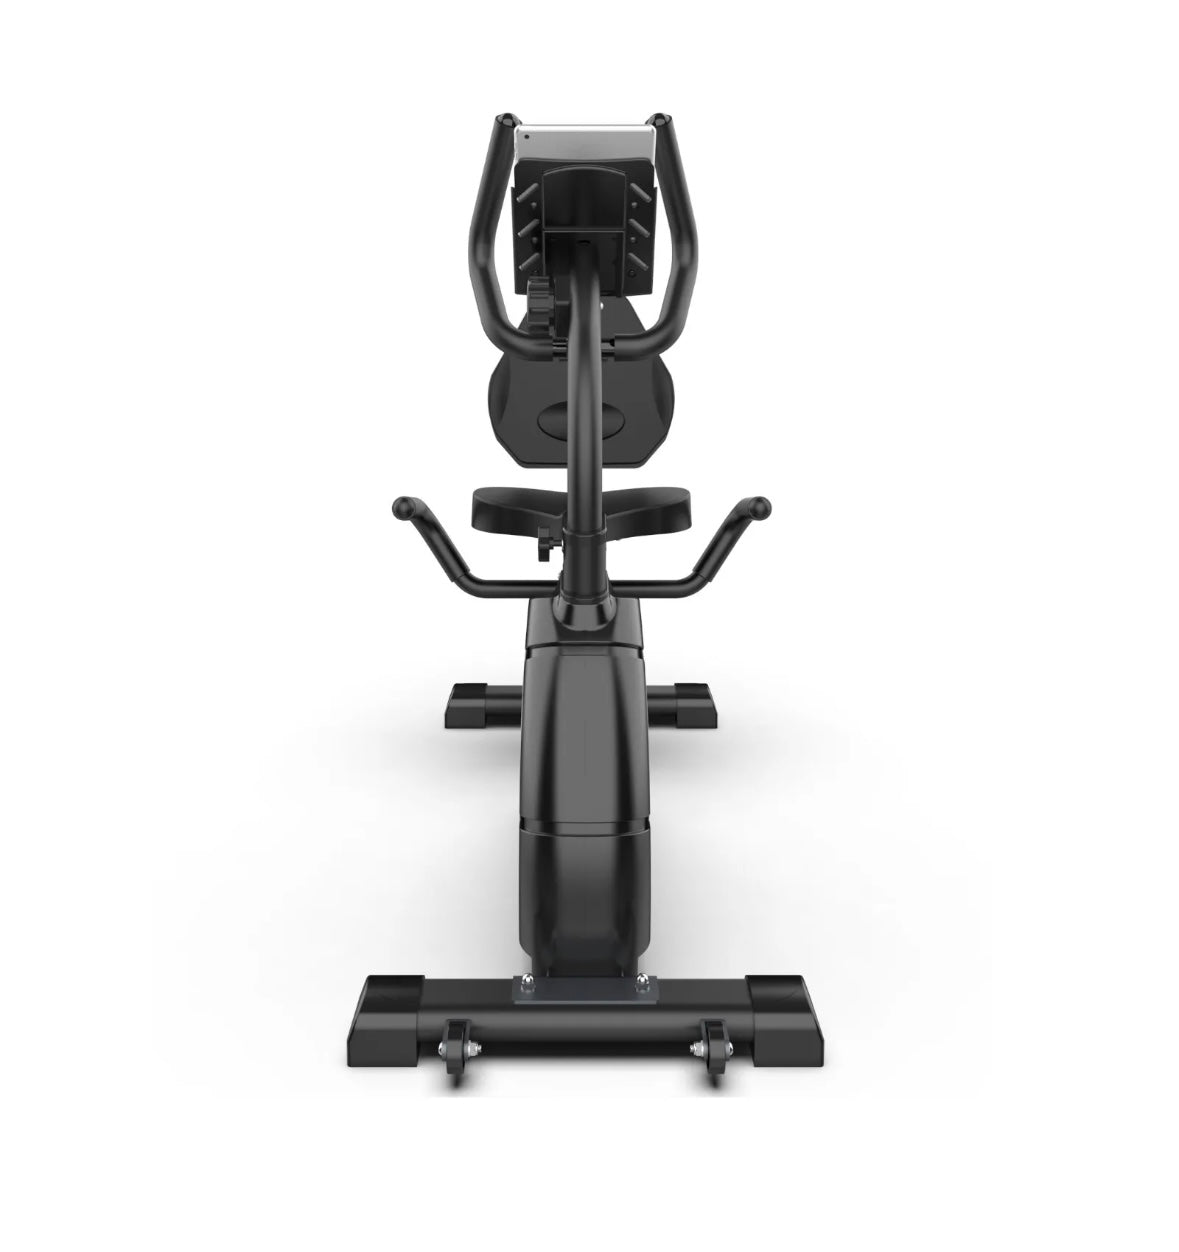 AGFC RECUMBENT EXERCISE BIKE WITH LCD MONITOR